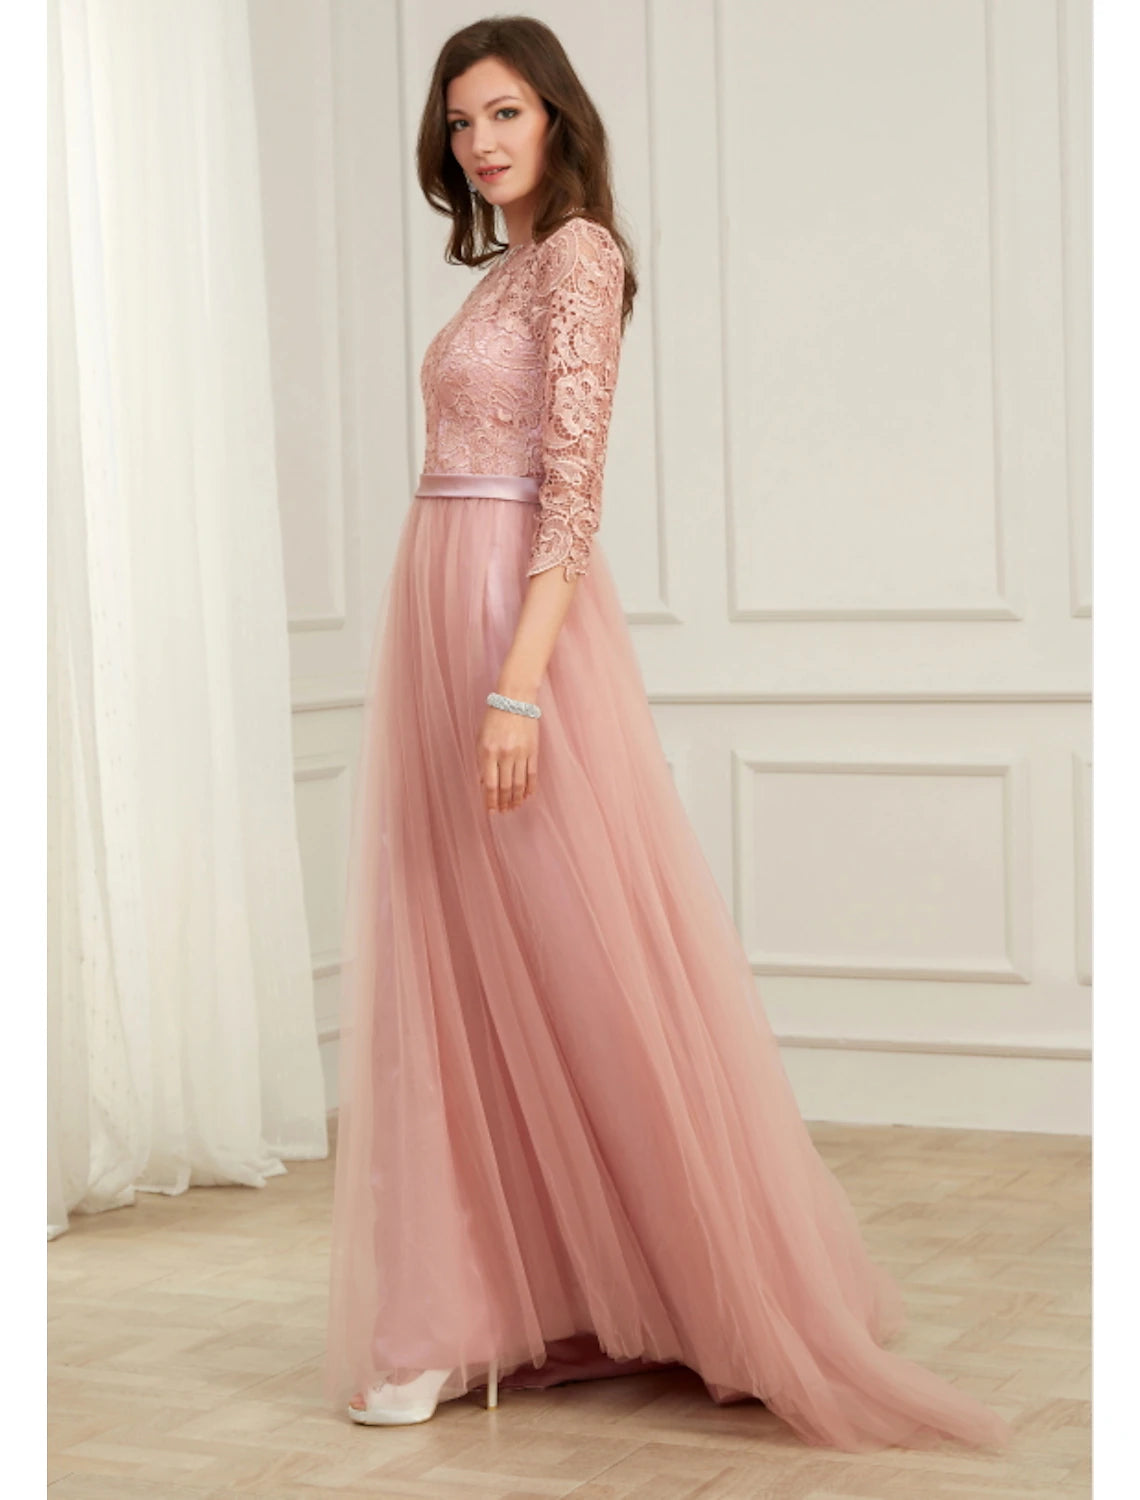 A-Line Evening Gown Spring Dress Party Wear Formal Evening Sweep / Brush Train Long Sleeve Jewel Neck Lace with Appliques